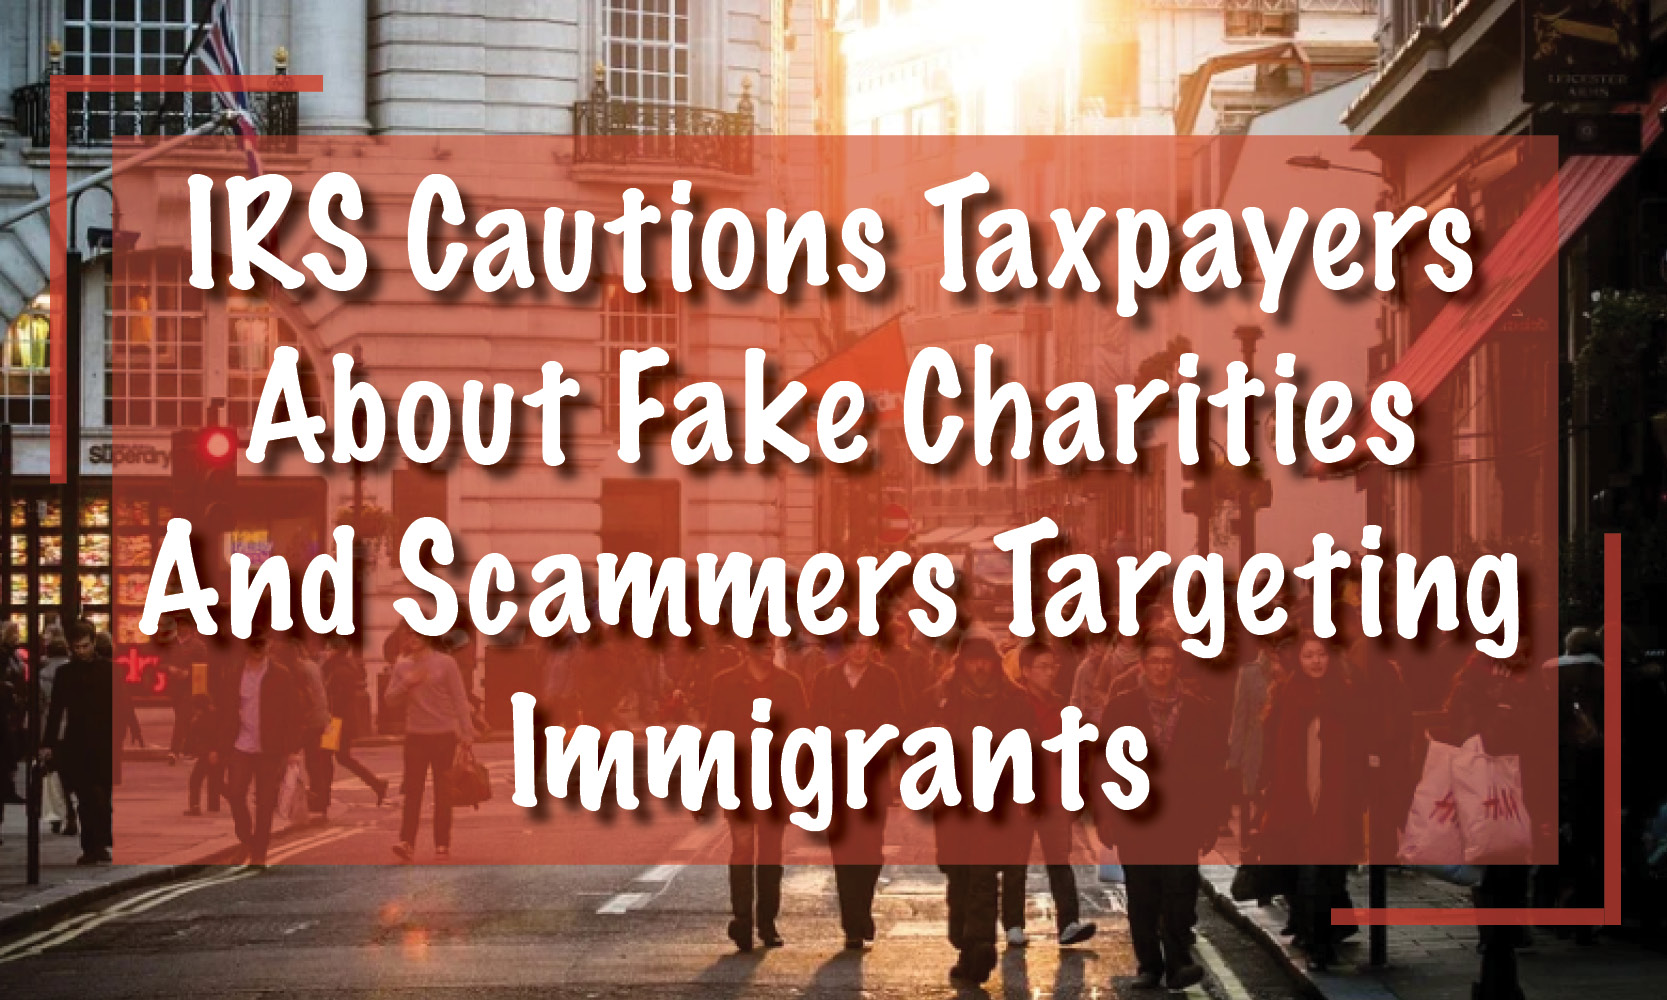 IRS Cautions, Fake Charity Scams Targeting Immigrants